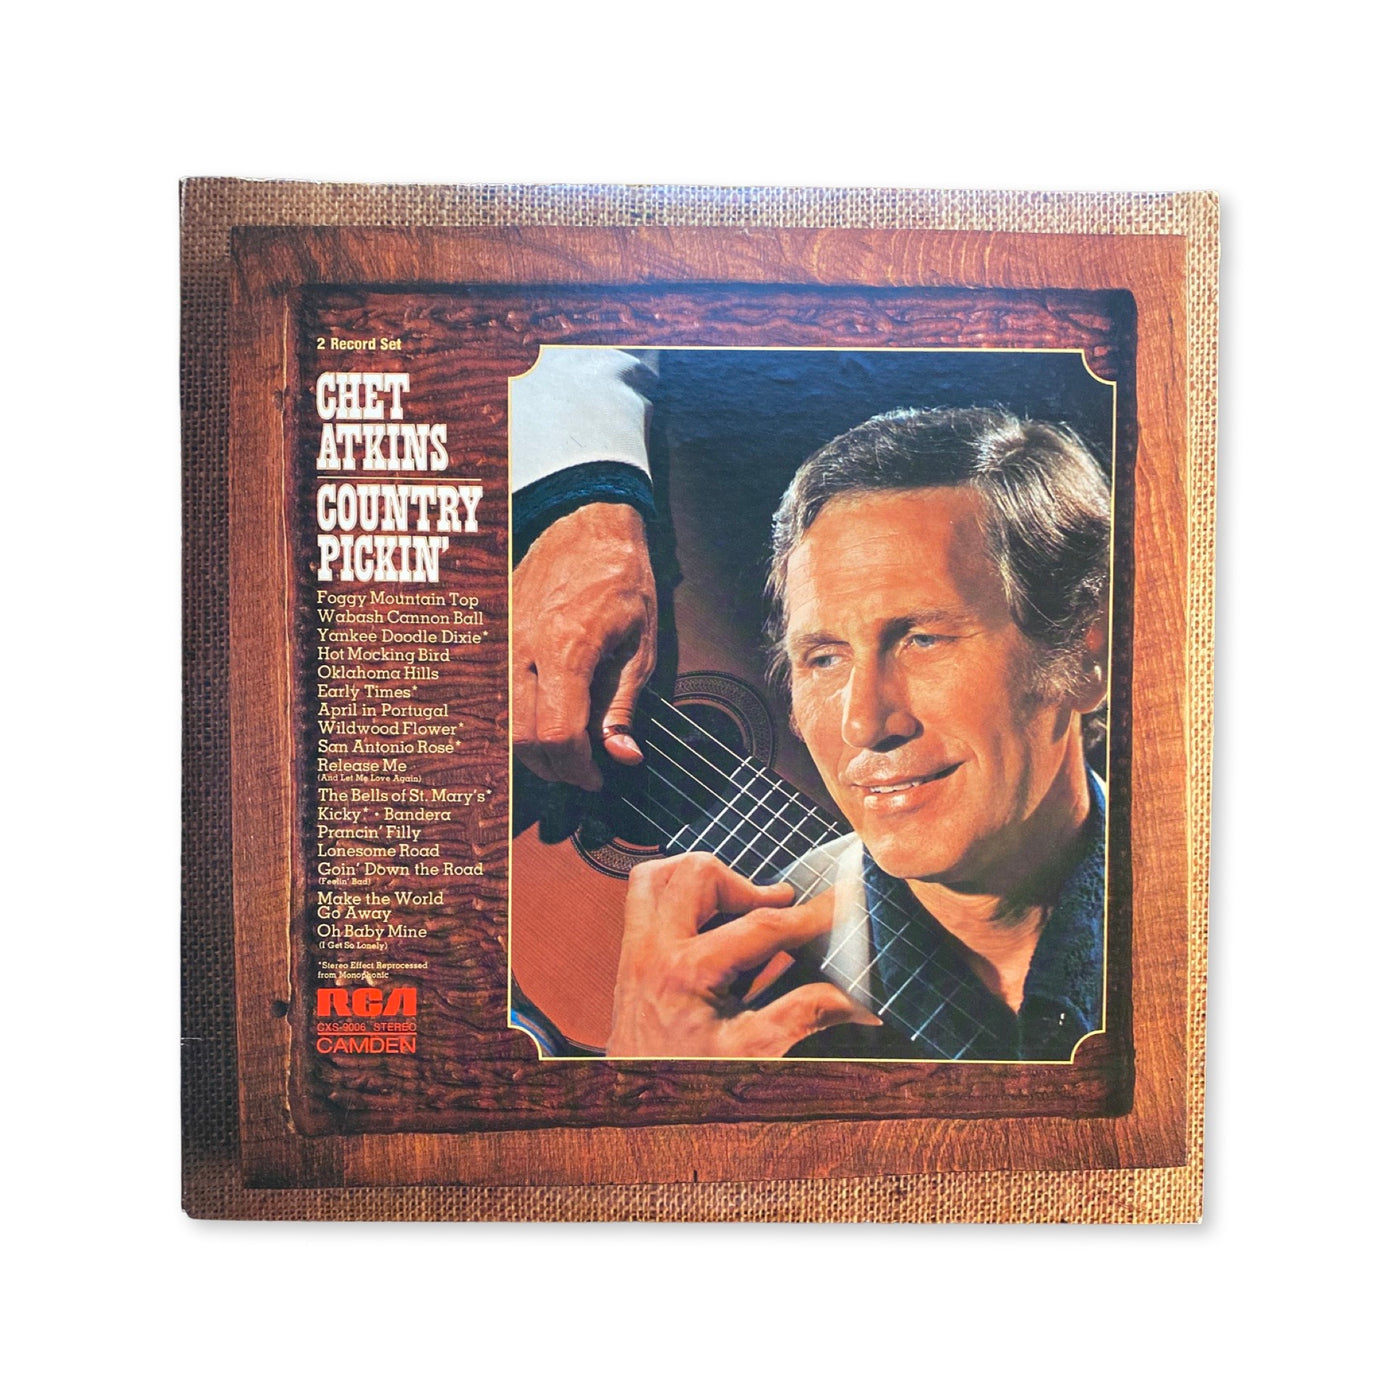 Chet Atkins – Country Pickin'